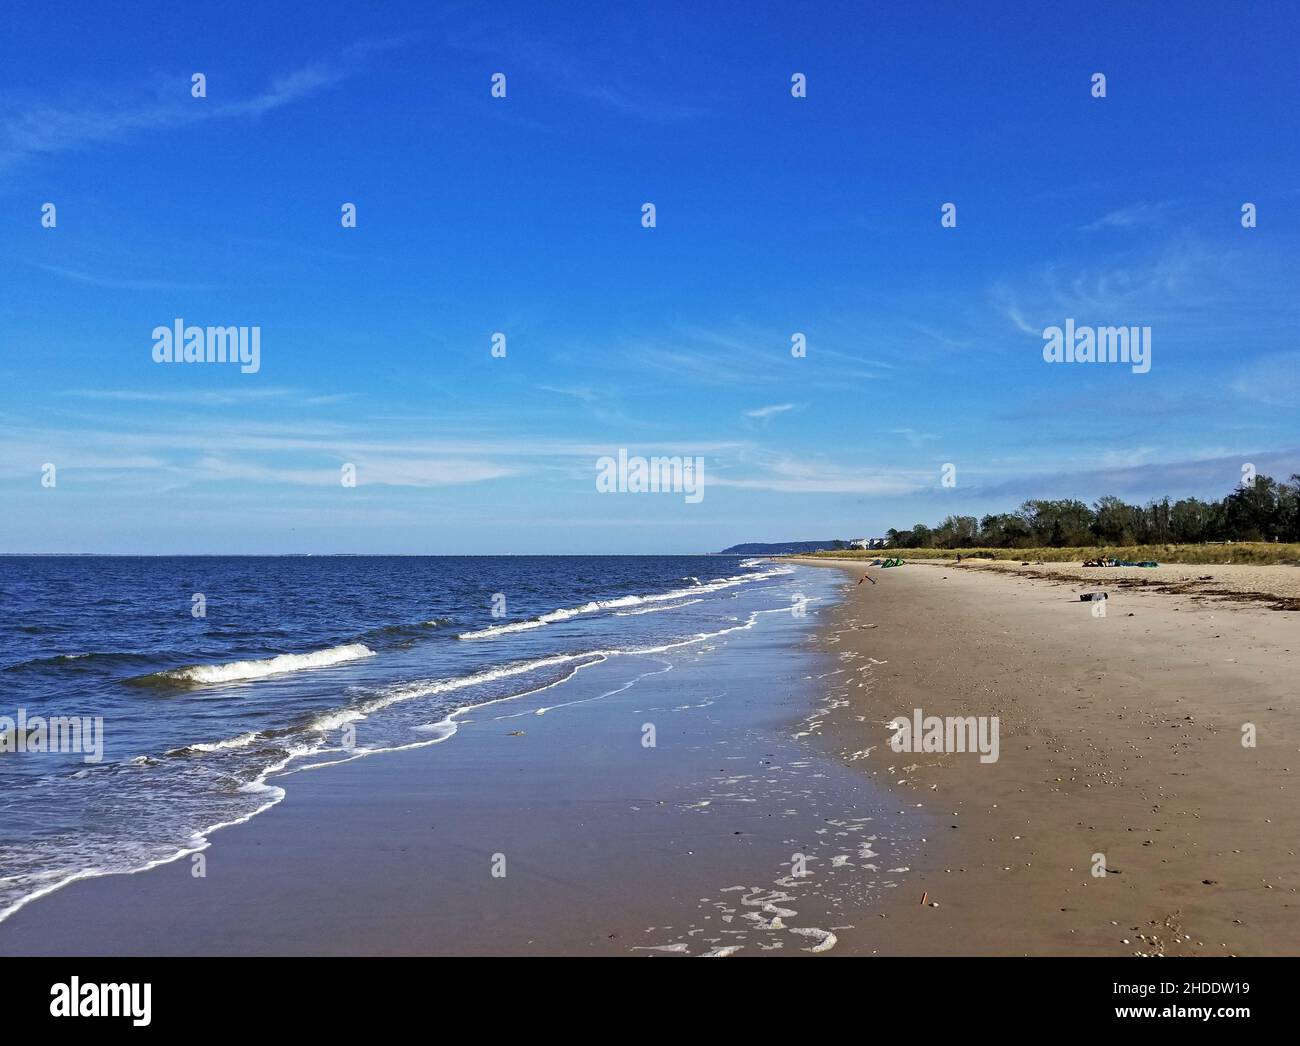 Waves of Sandy Hook bay come crashing into shore at a beach in Port Monmouth, New Jersey, on a sunny autumn day -01 Stock Photo